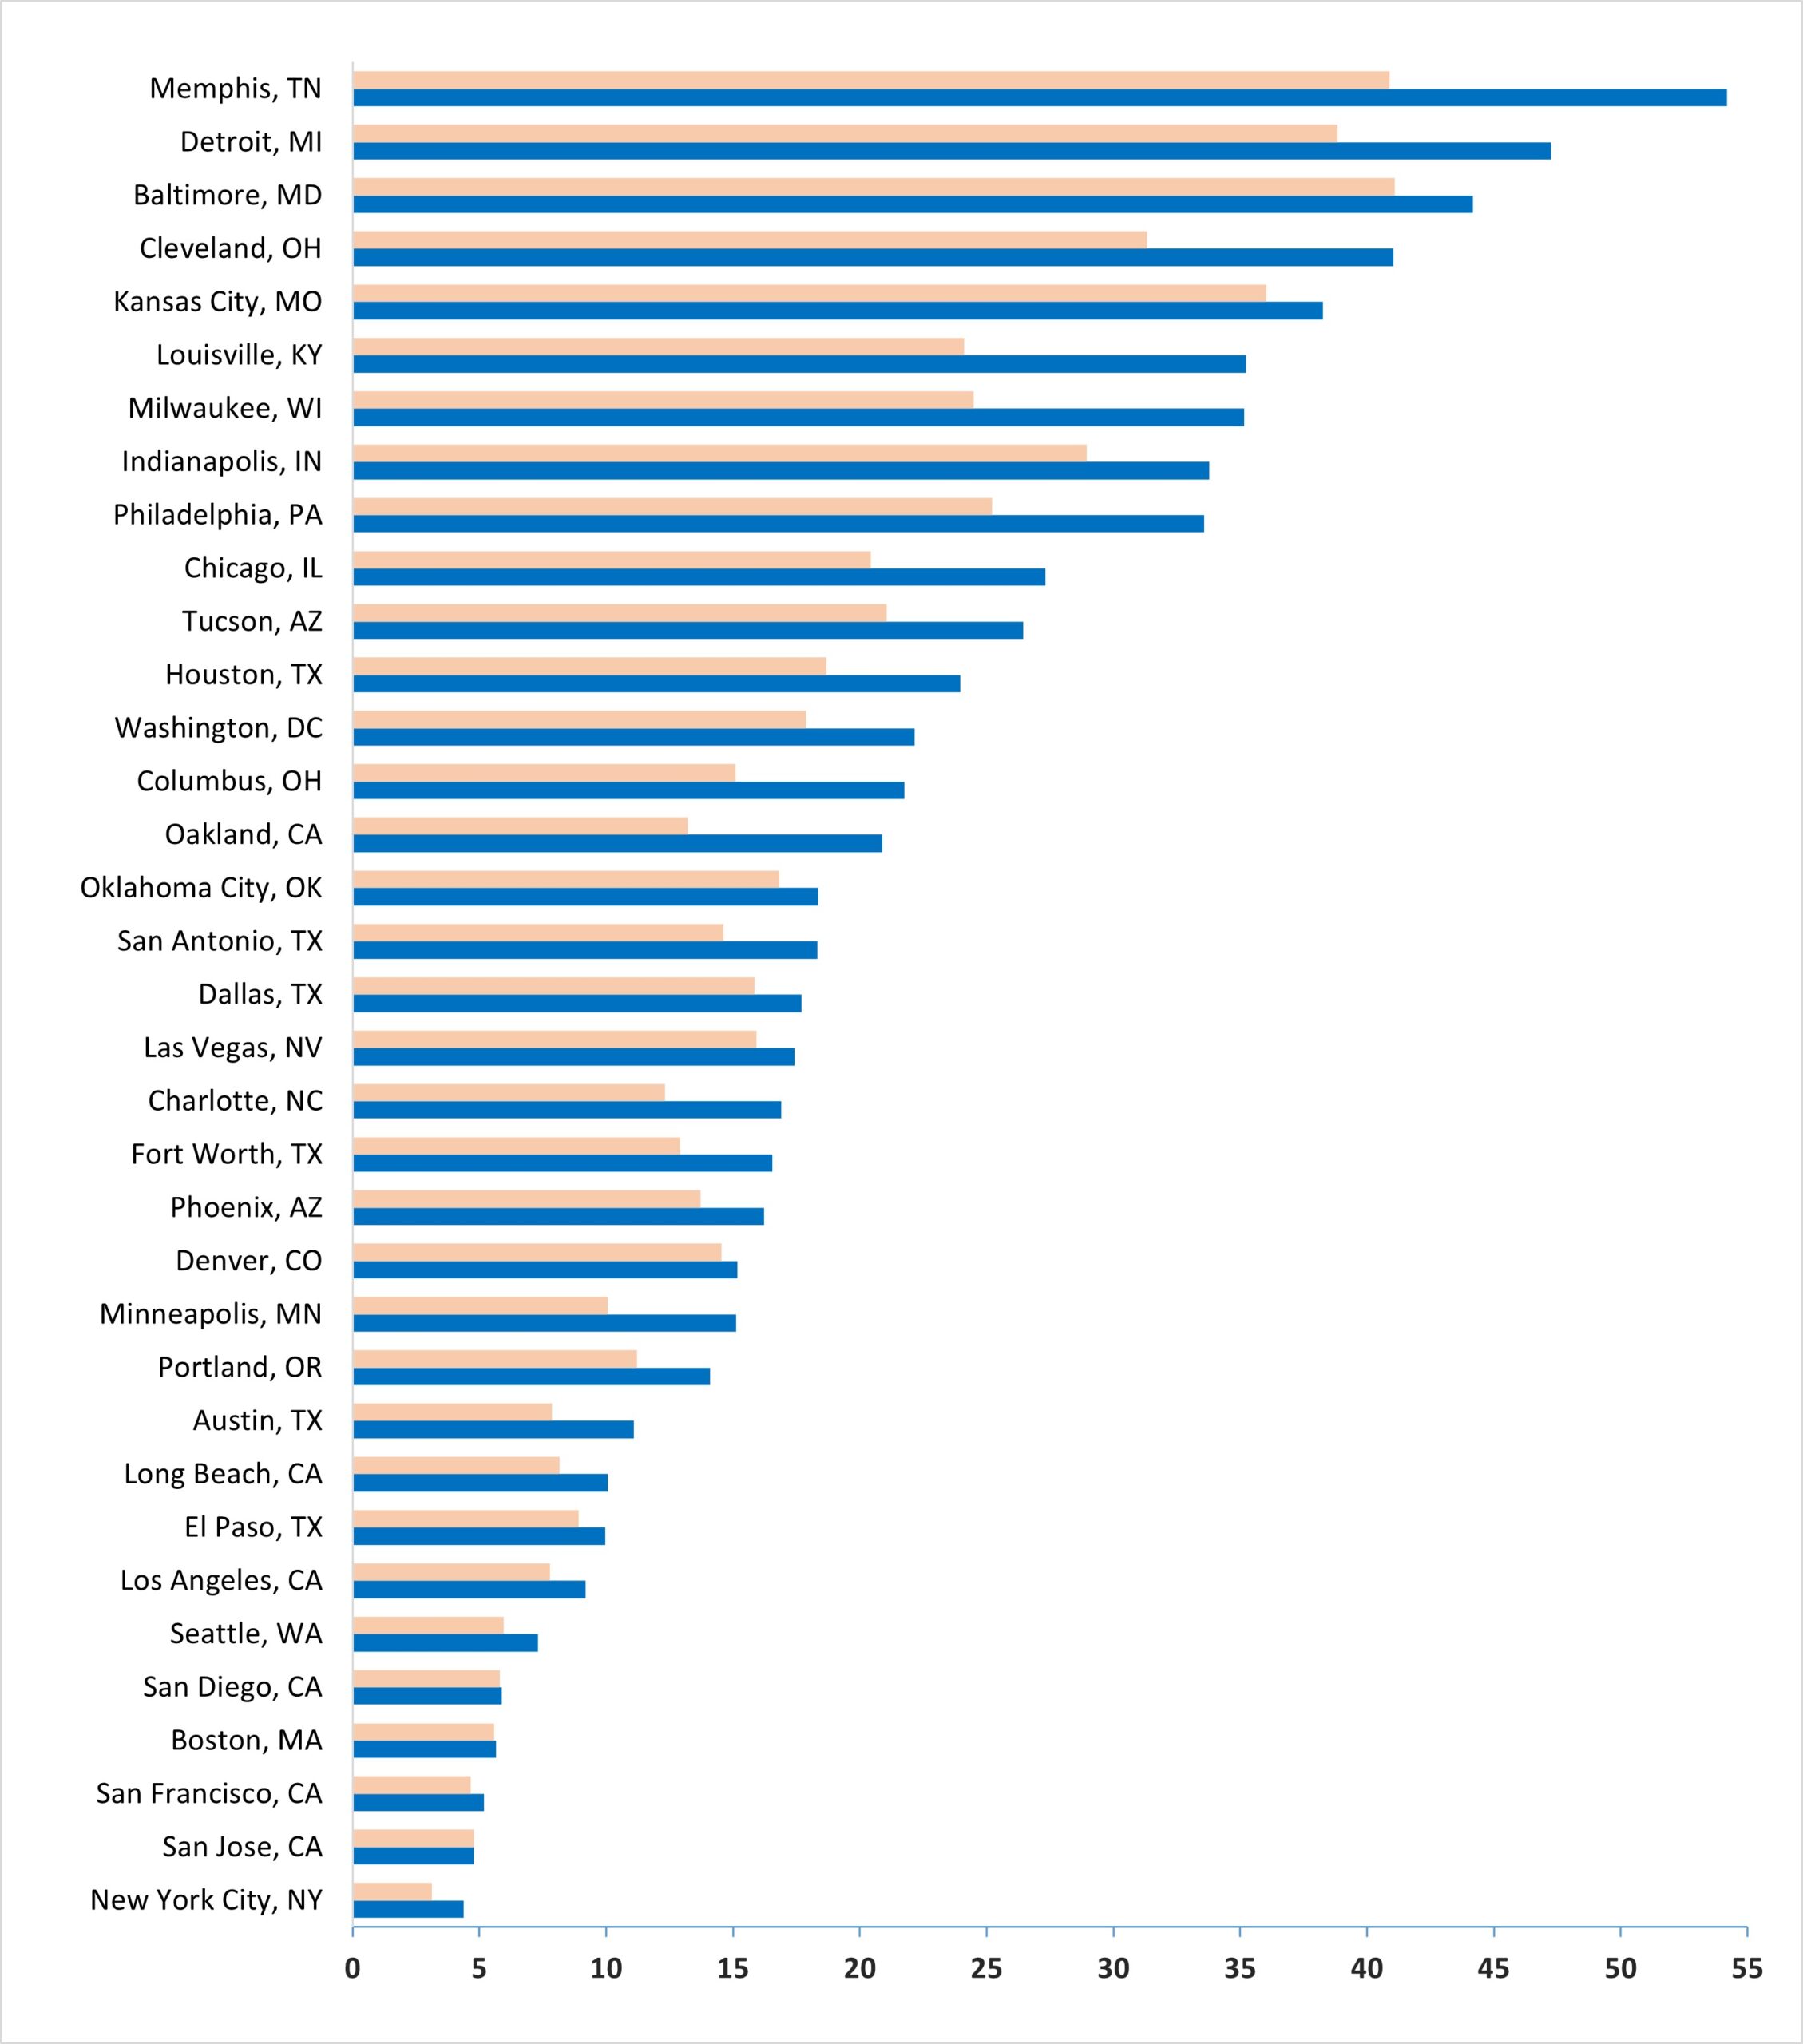 Chart showing 2019 and 2021 gun death figures per 100,000 population. Memphis, Detroit, and Baltimore had the highest rates.